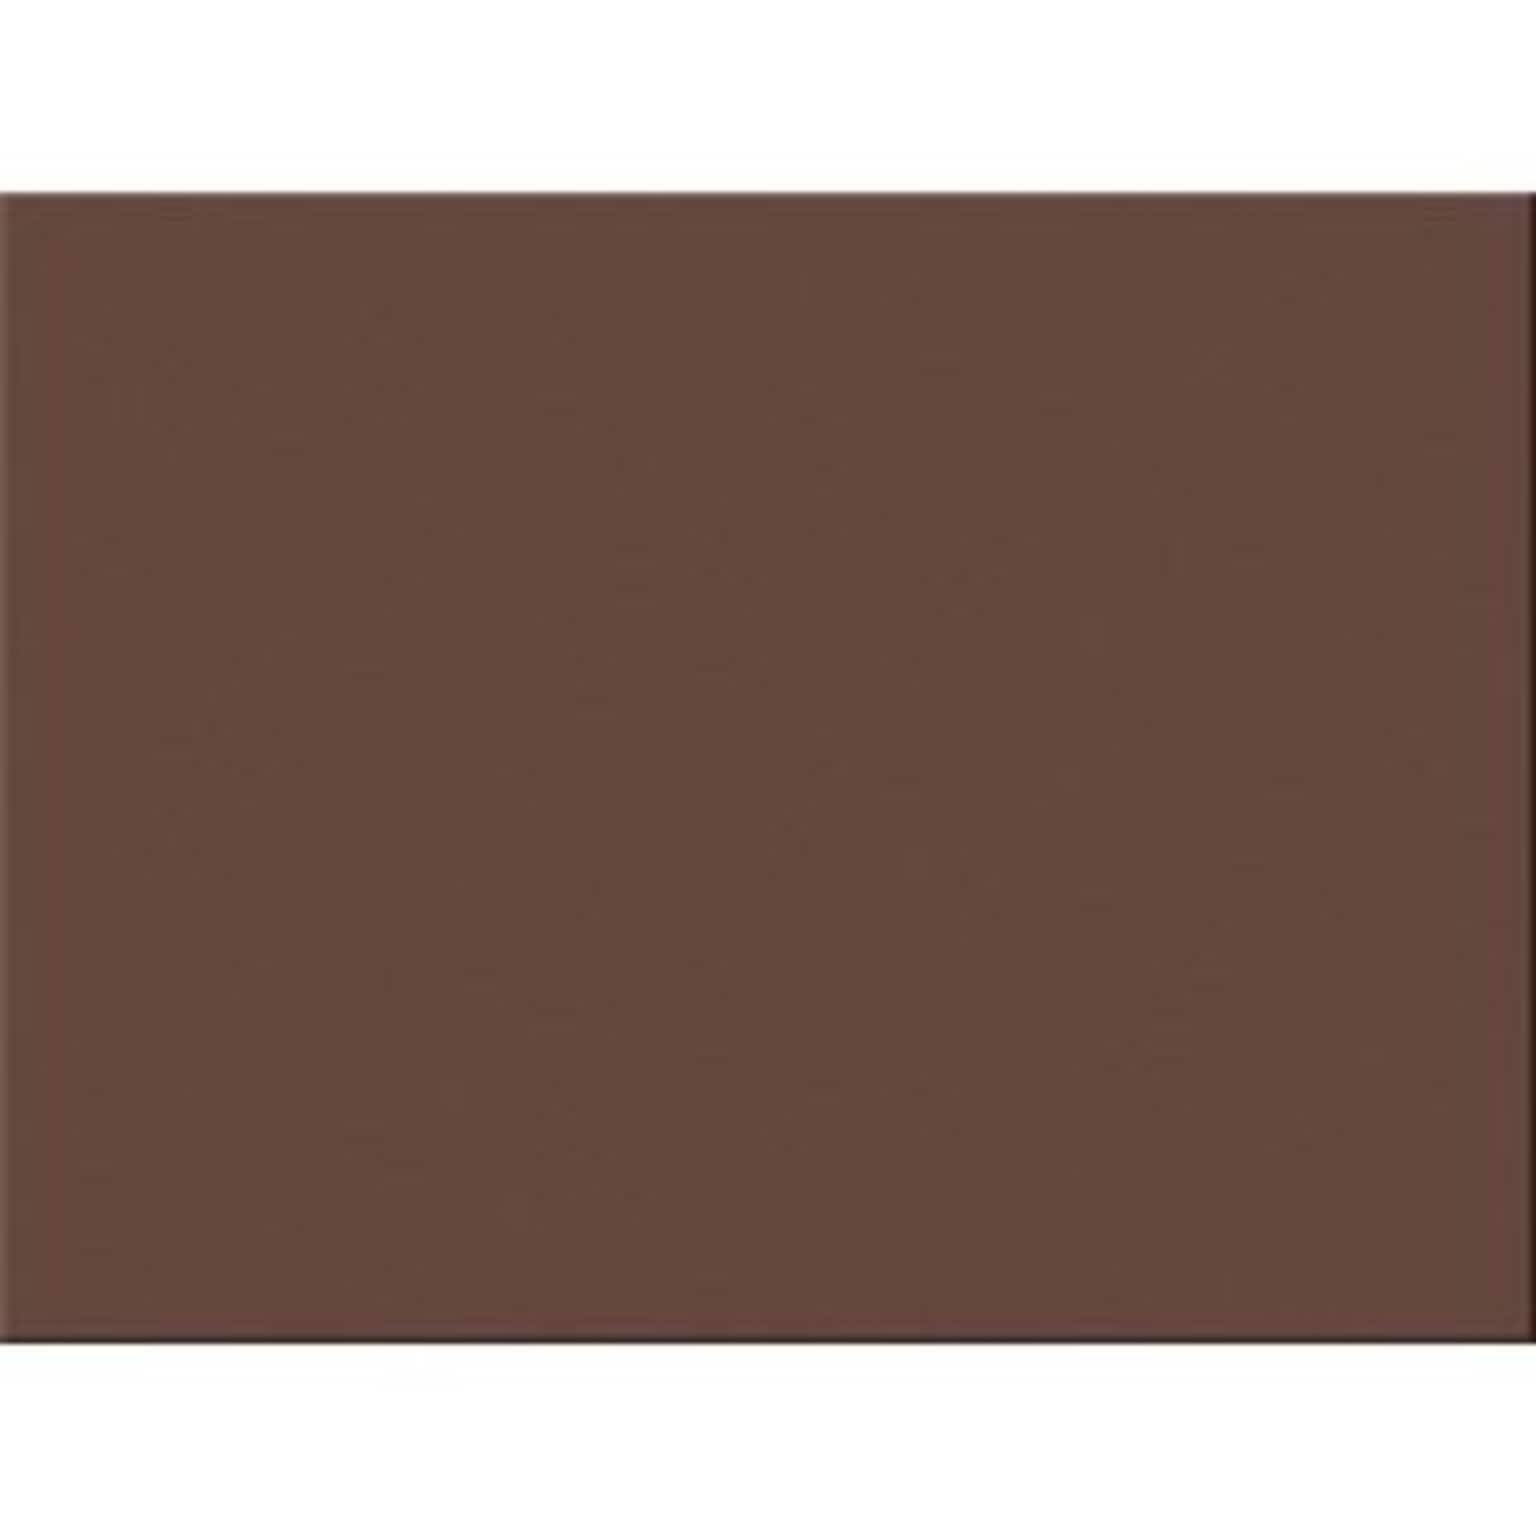 Southwest School Supply 18 x 24 Construction Paper, Dark Brown, 50 Sheets/Pack (P103088)